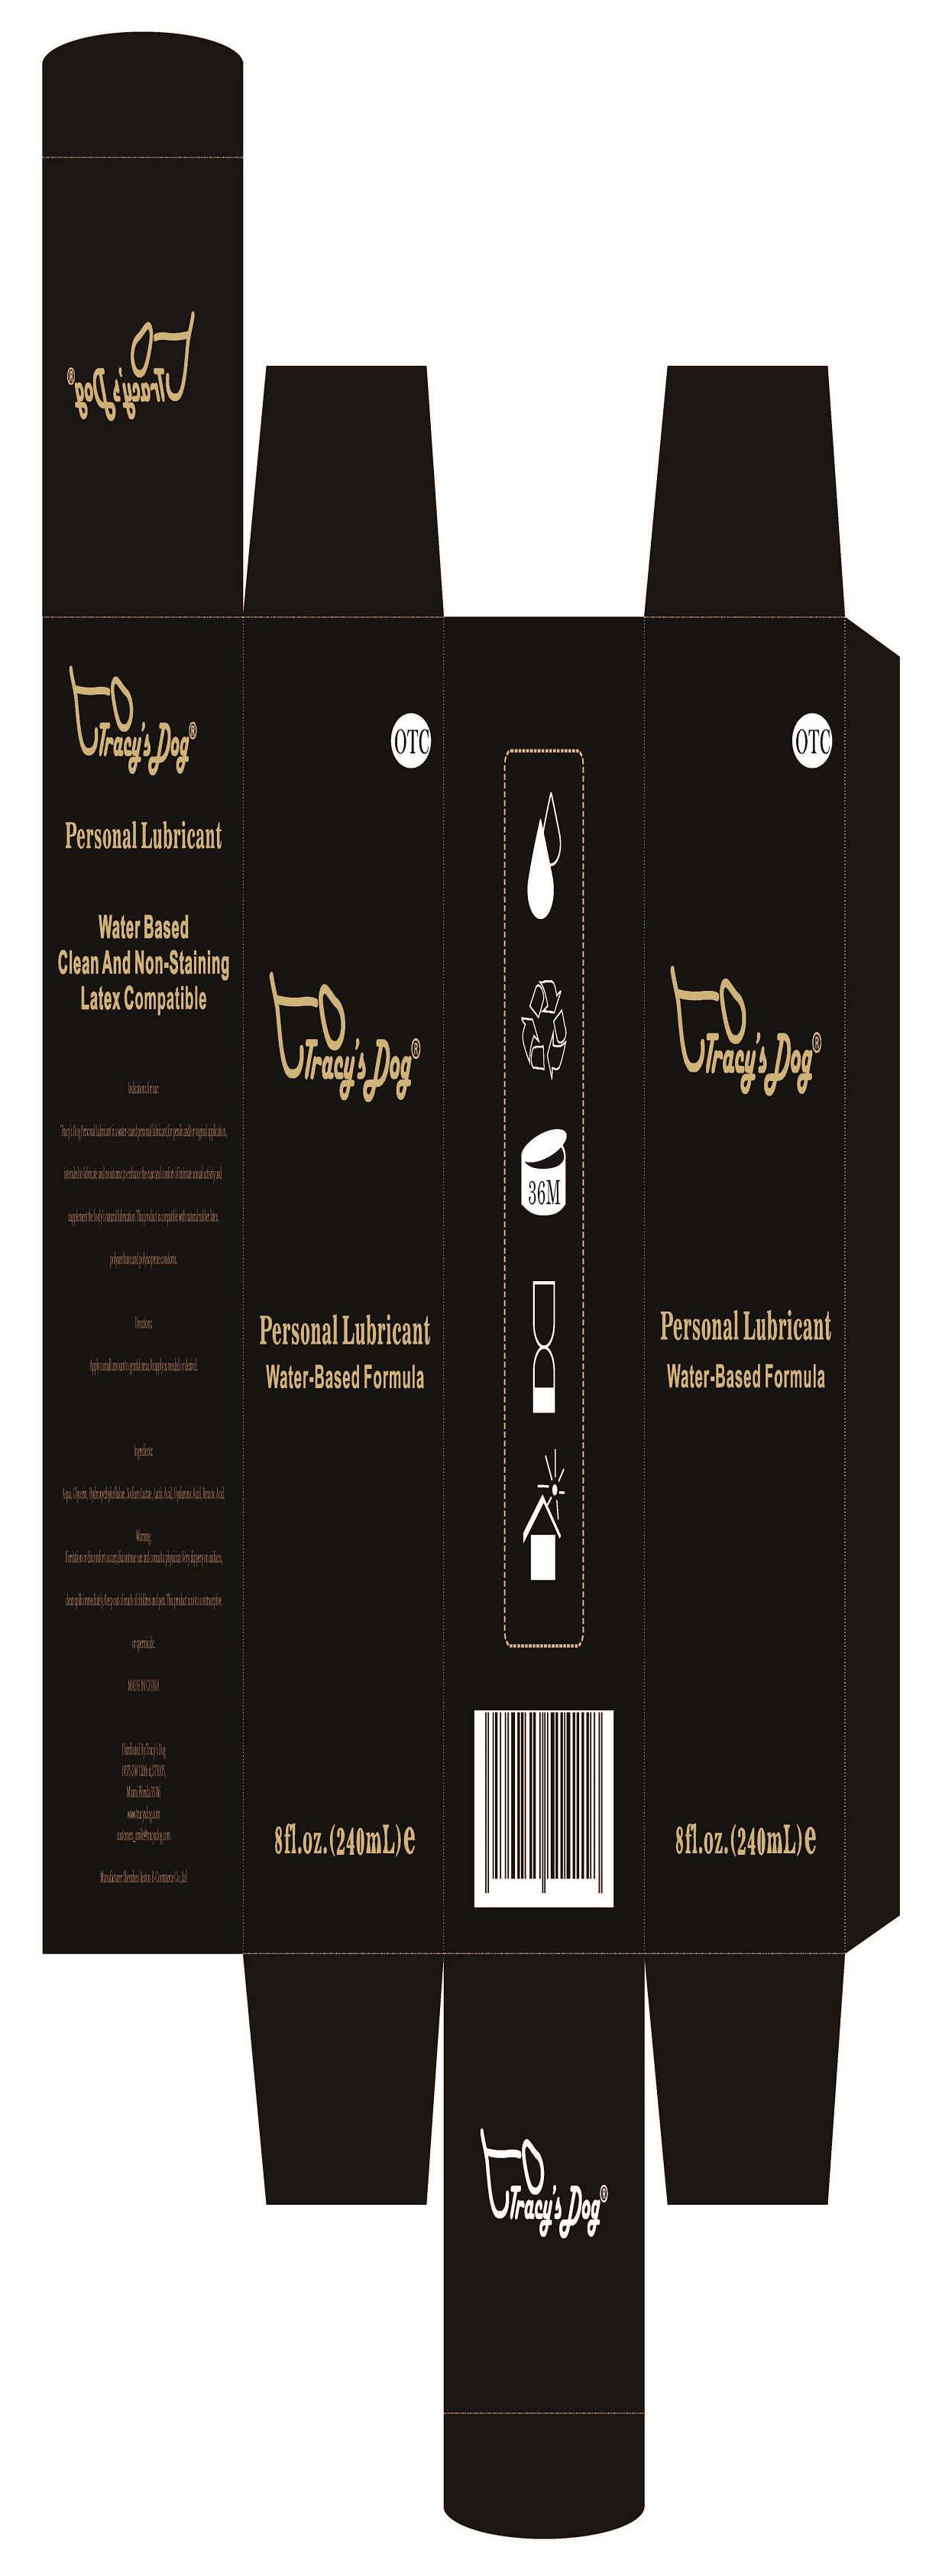 Is Tracys Dog Personal Lubricant 300ml | Personal Lubricant Oil safe while breastfeeding